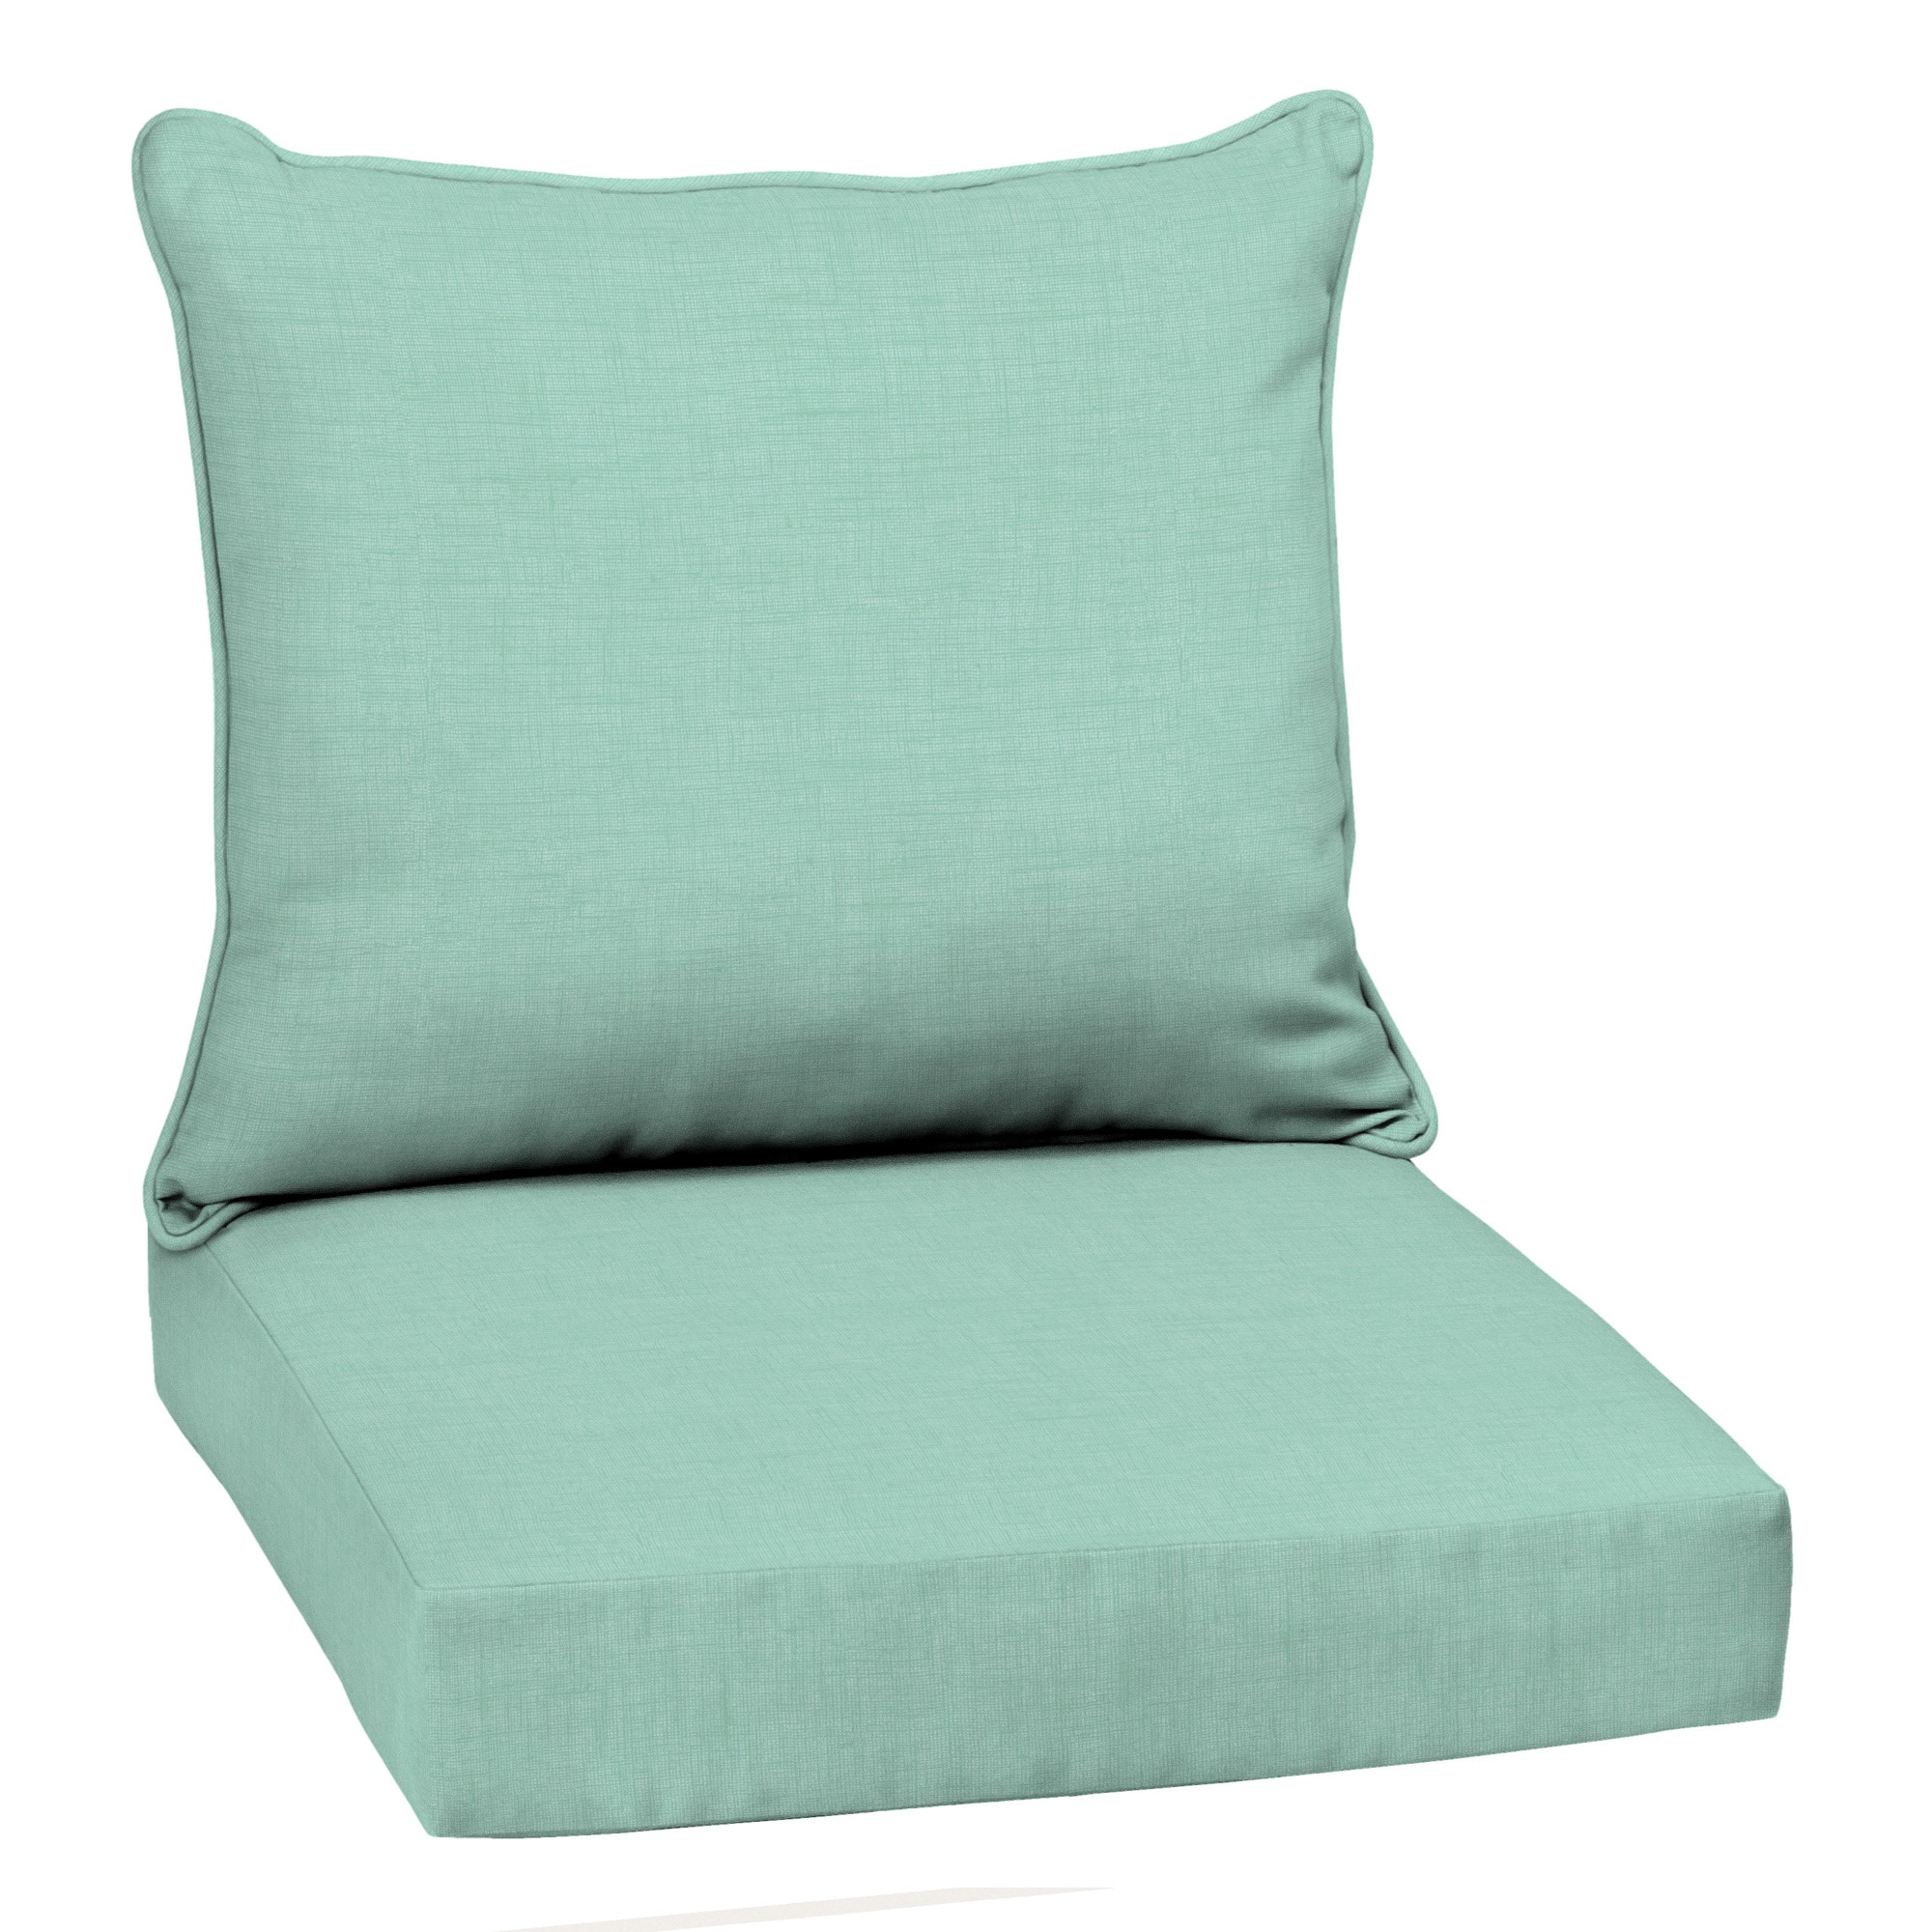 High Back Chair Cushion with Ties, Indoor/Outdoor Replacement Cushions Sofa  Chair Cushion Mat Recliner Cushion, Green